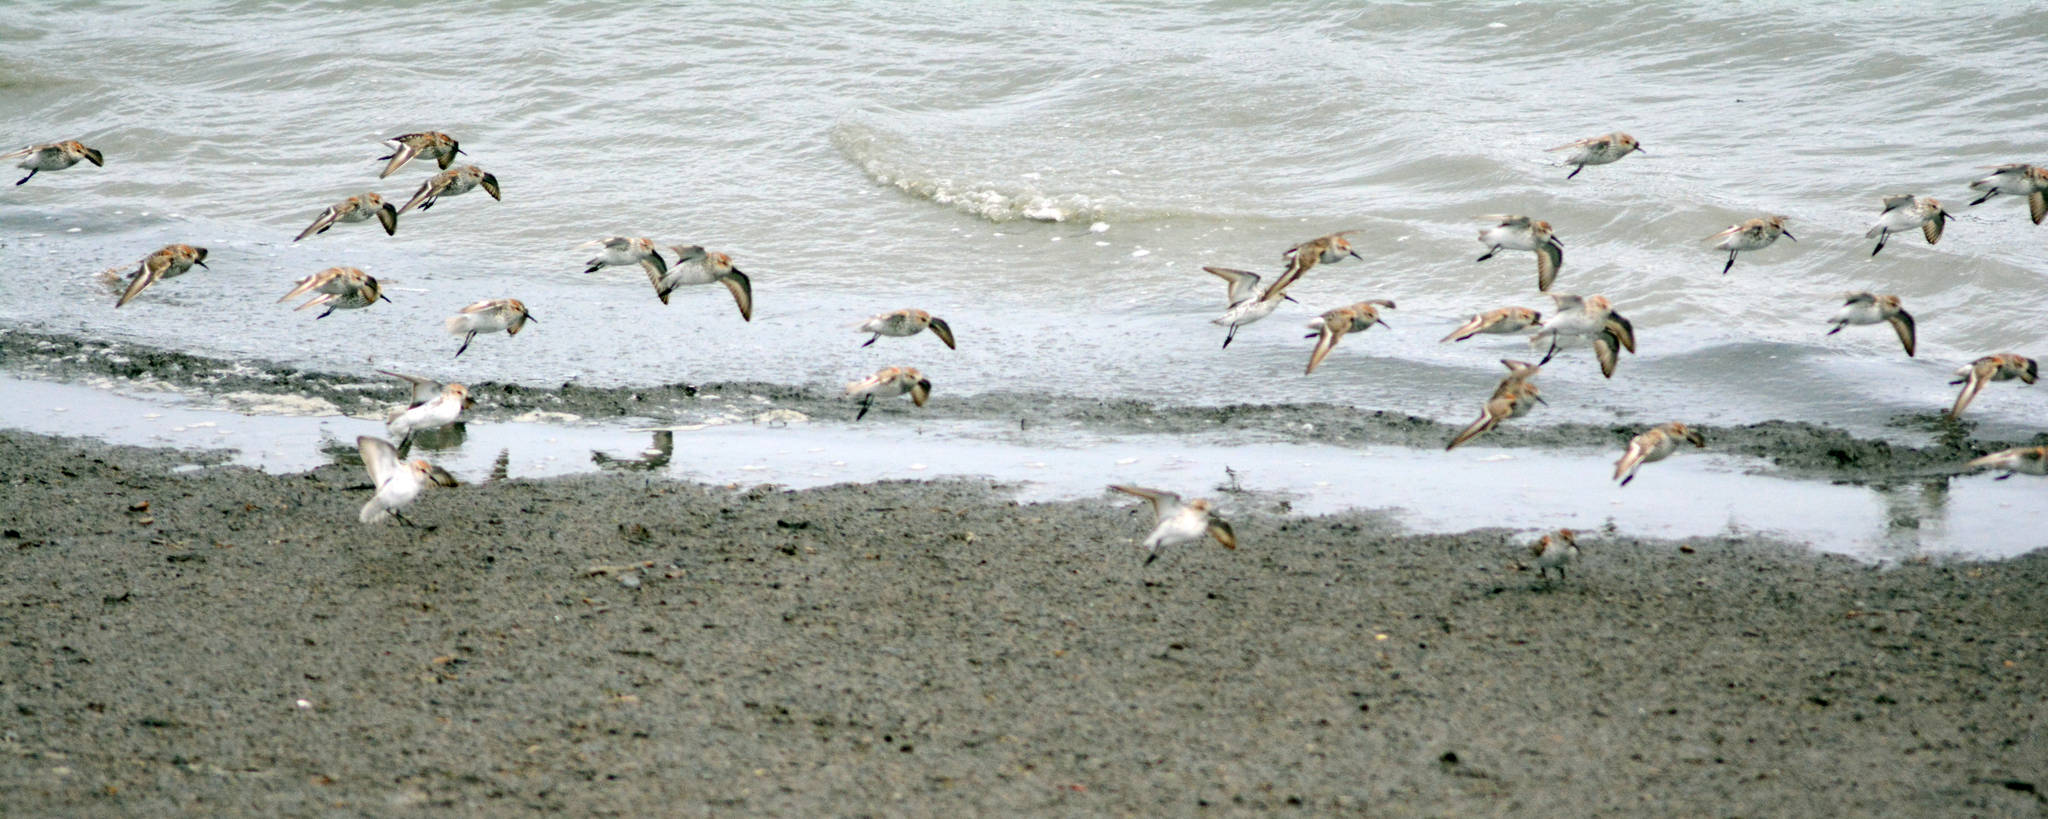 Western sandpipers land on the Mud Bay beach about noon Saturday, May 12, 2018, during the Kachemak Bay Shorebird Festival. (Photo by Michael Armstrong / Homer News).